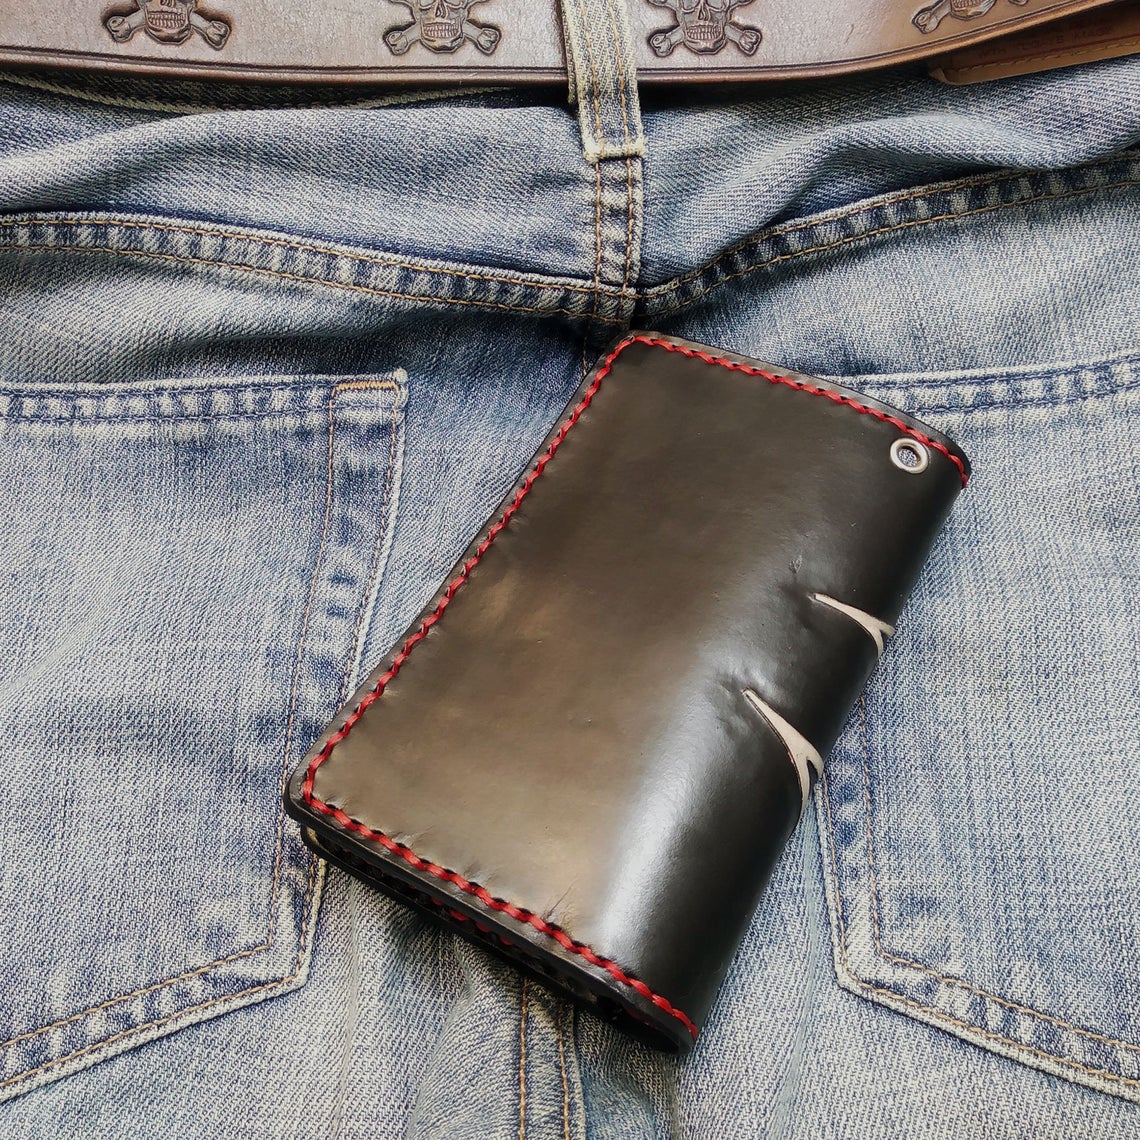 Handmade Leather Wallet Biker Style Engraved With Red Devil By Another Way of Life